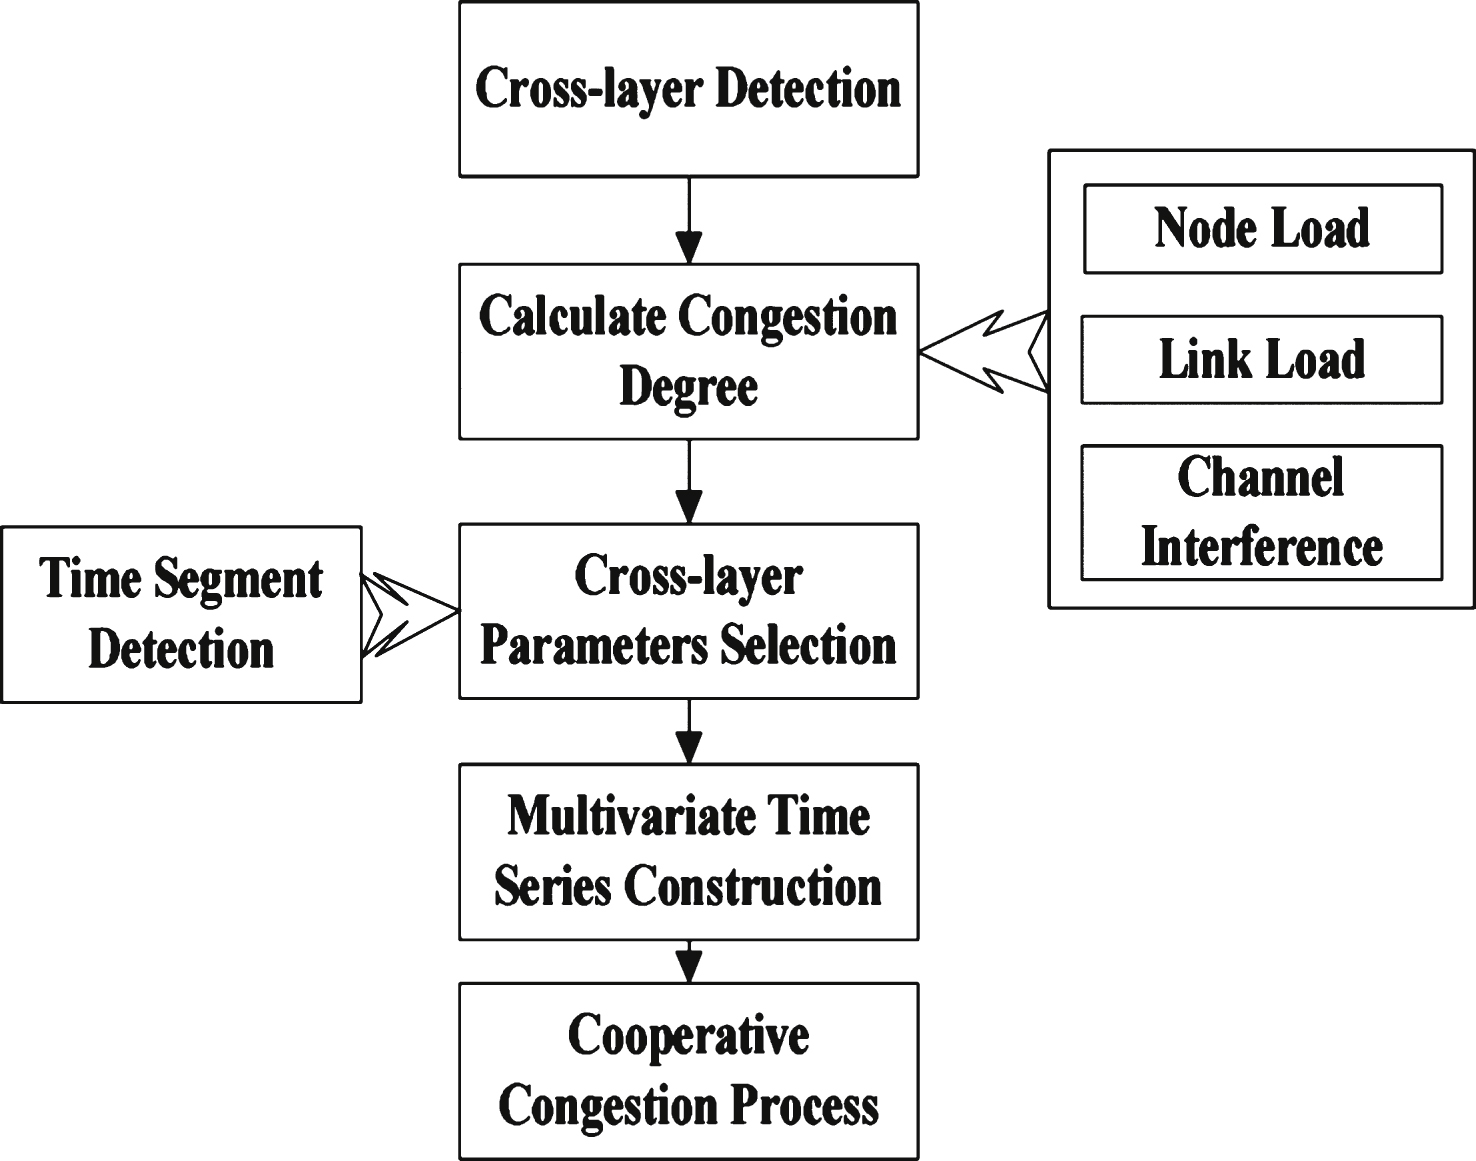 Multivariate time series prediction-based congestionprocessing flowchart.